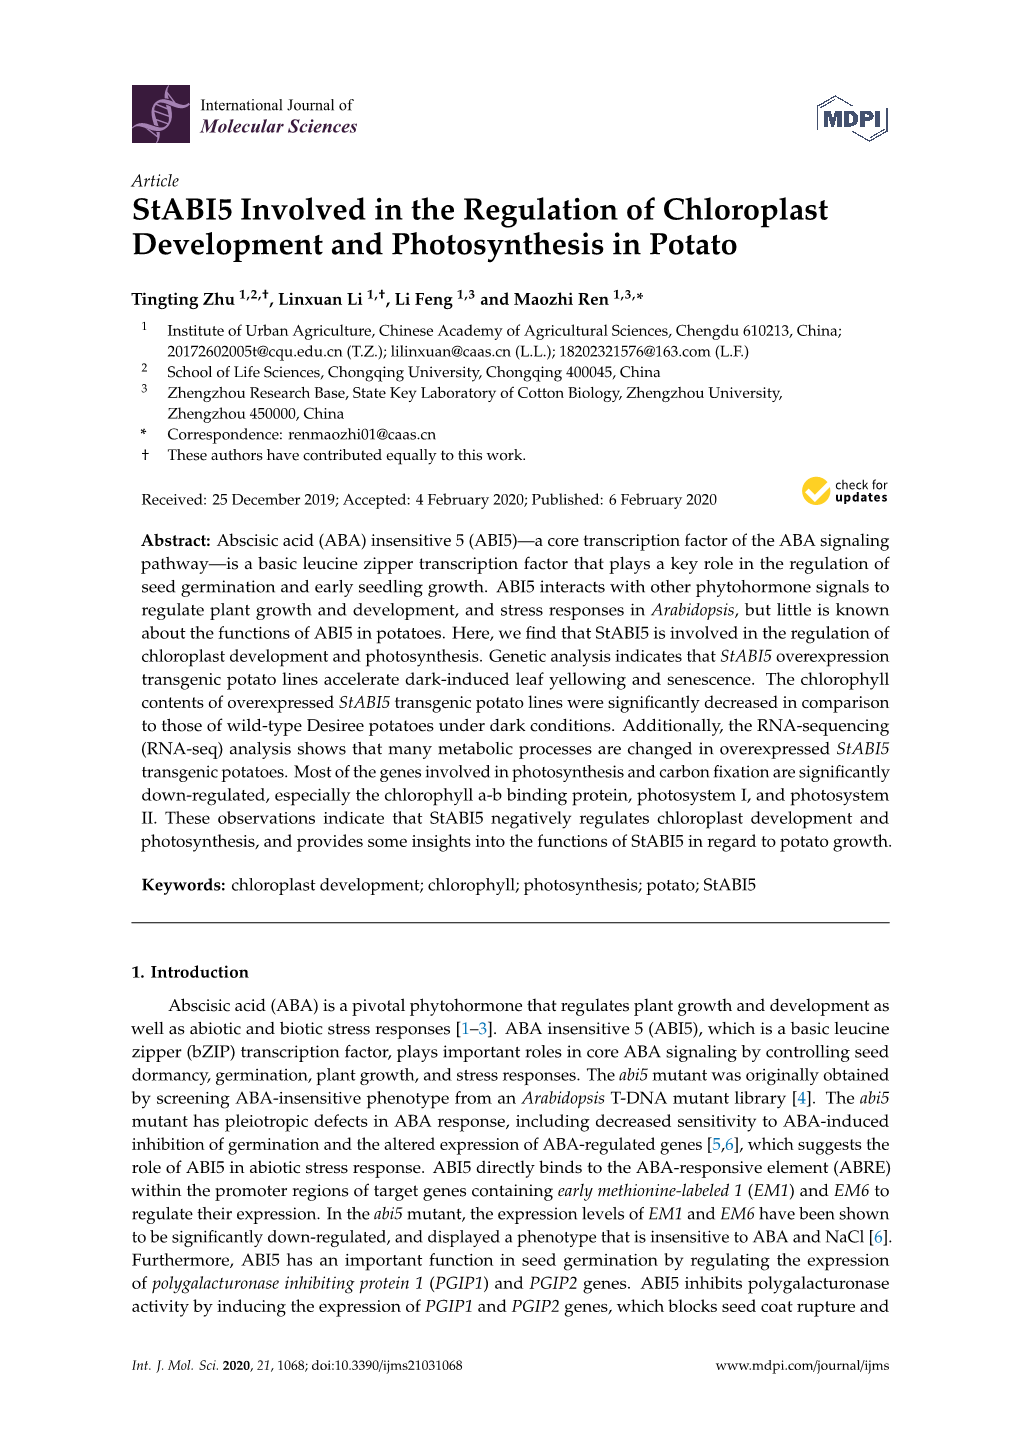 Stabi5 Involved in the Regulation of Chloroplast Development and Photosynthesis in Potato